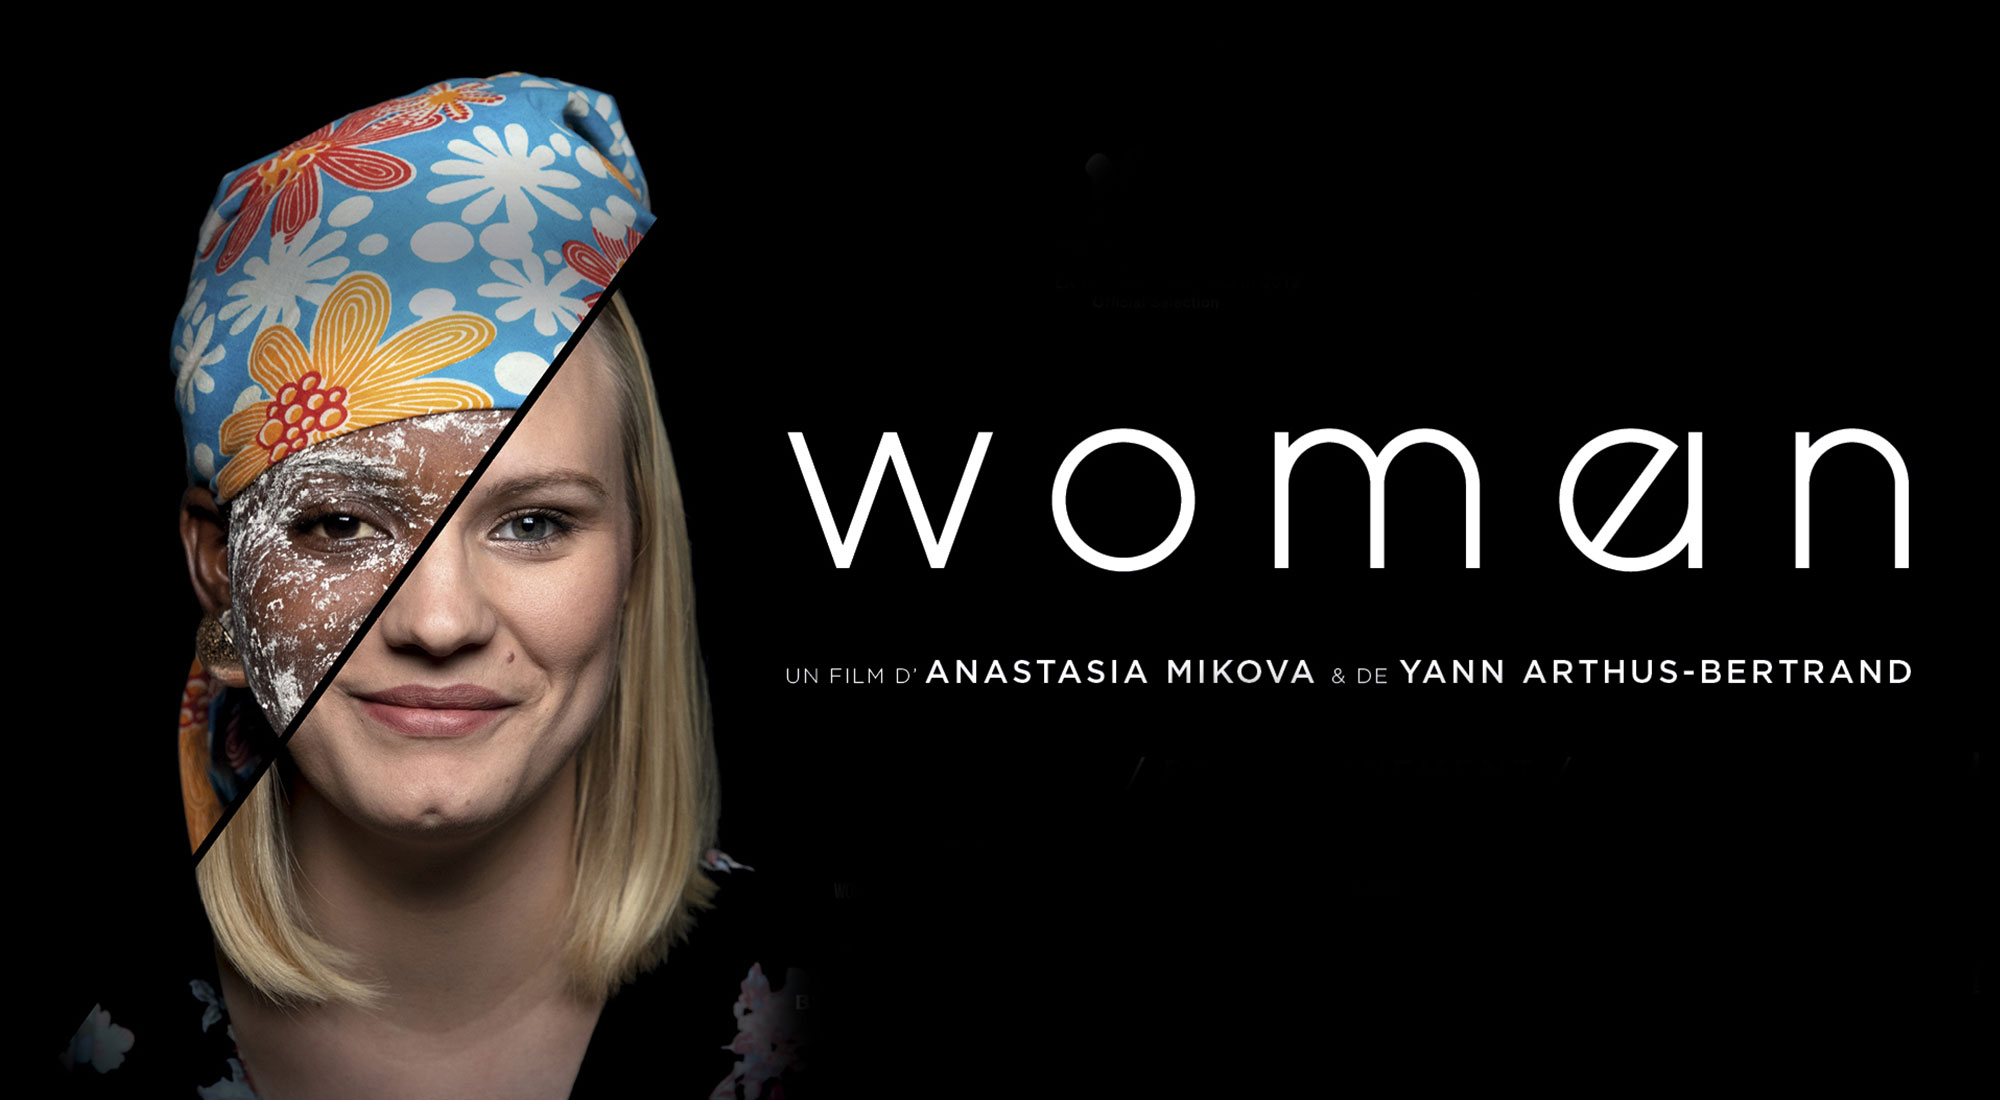 WOMAN, a film by Anastasia Mikova and Yann Arthus-Bertrand, now available on VOD